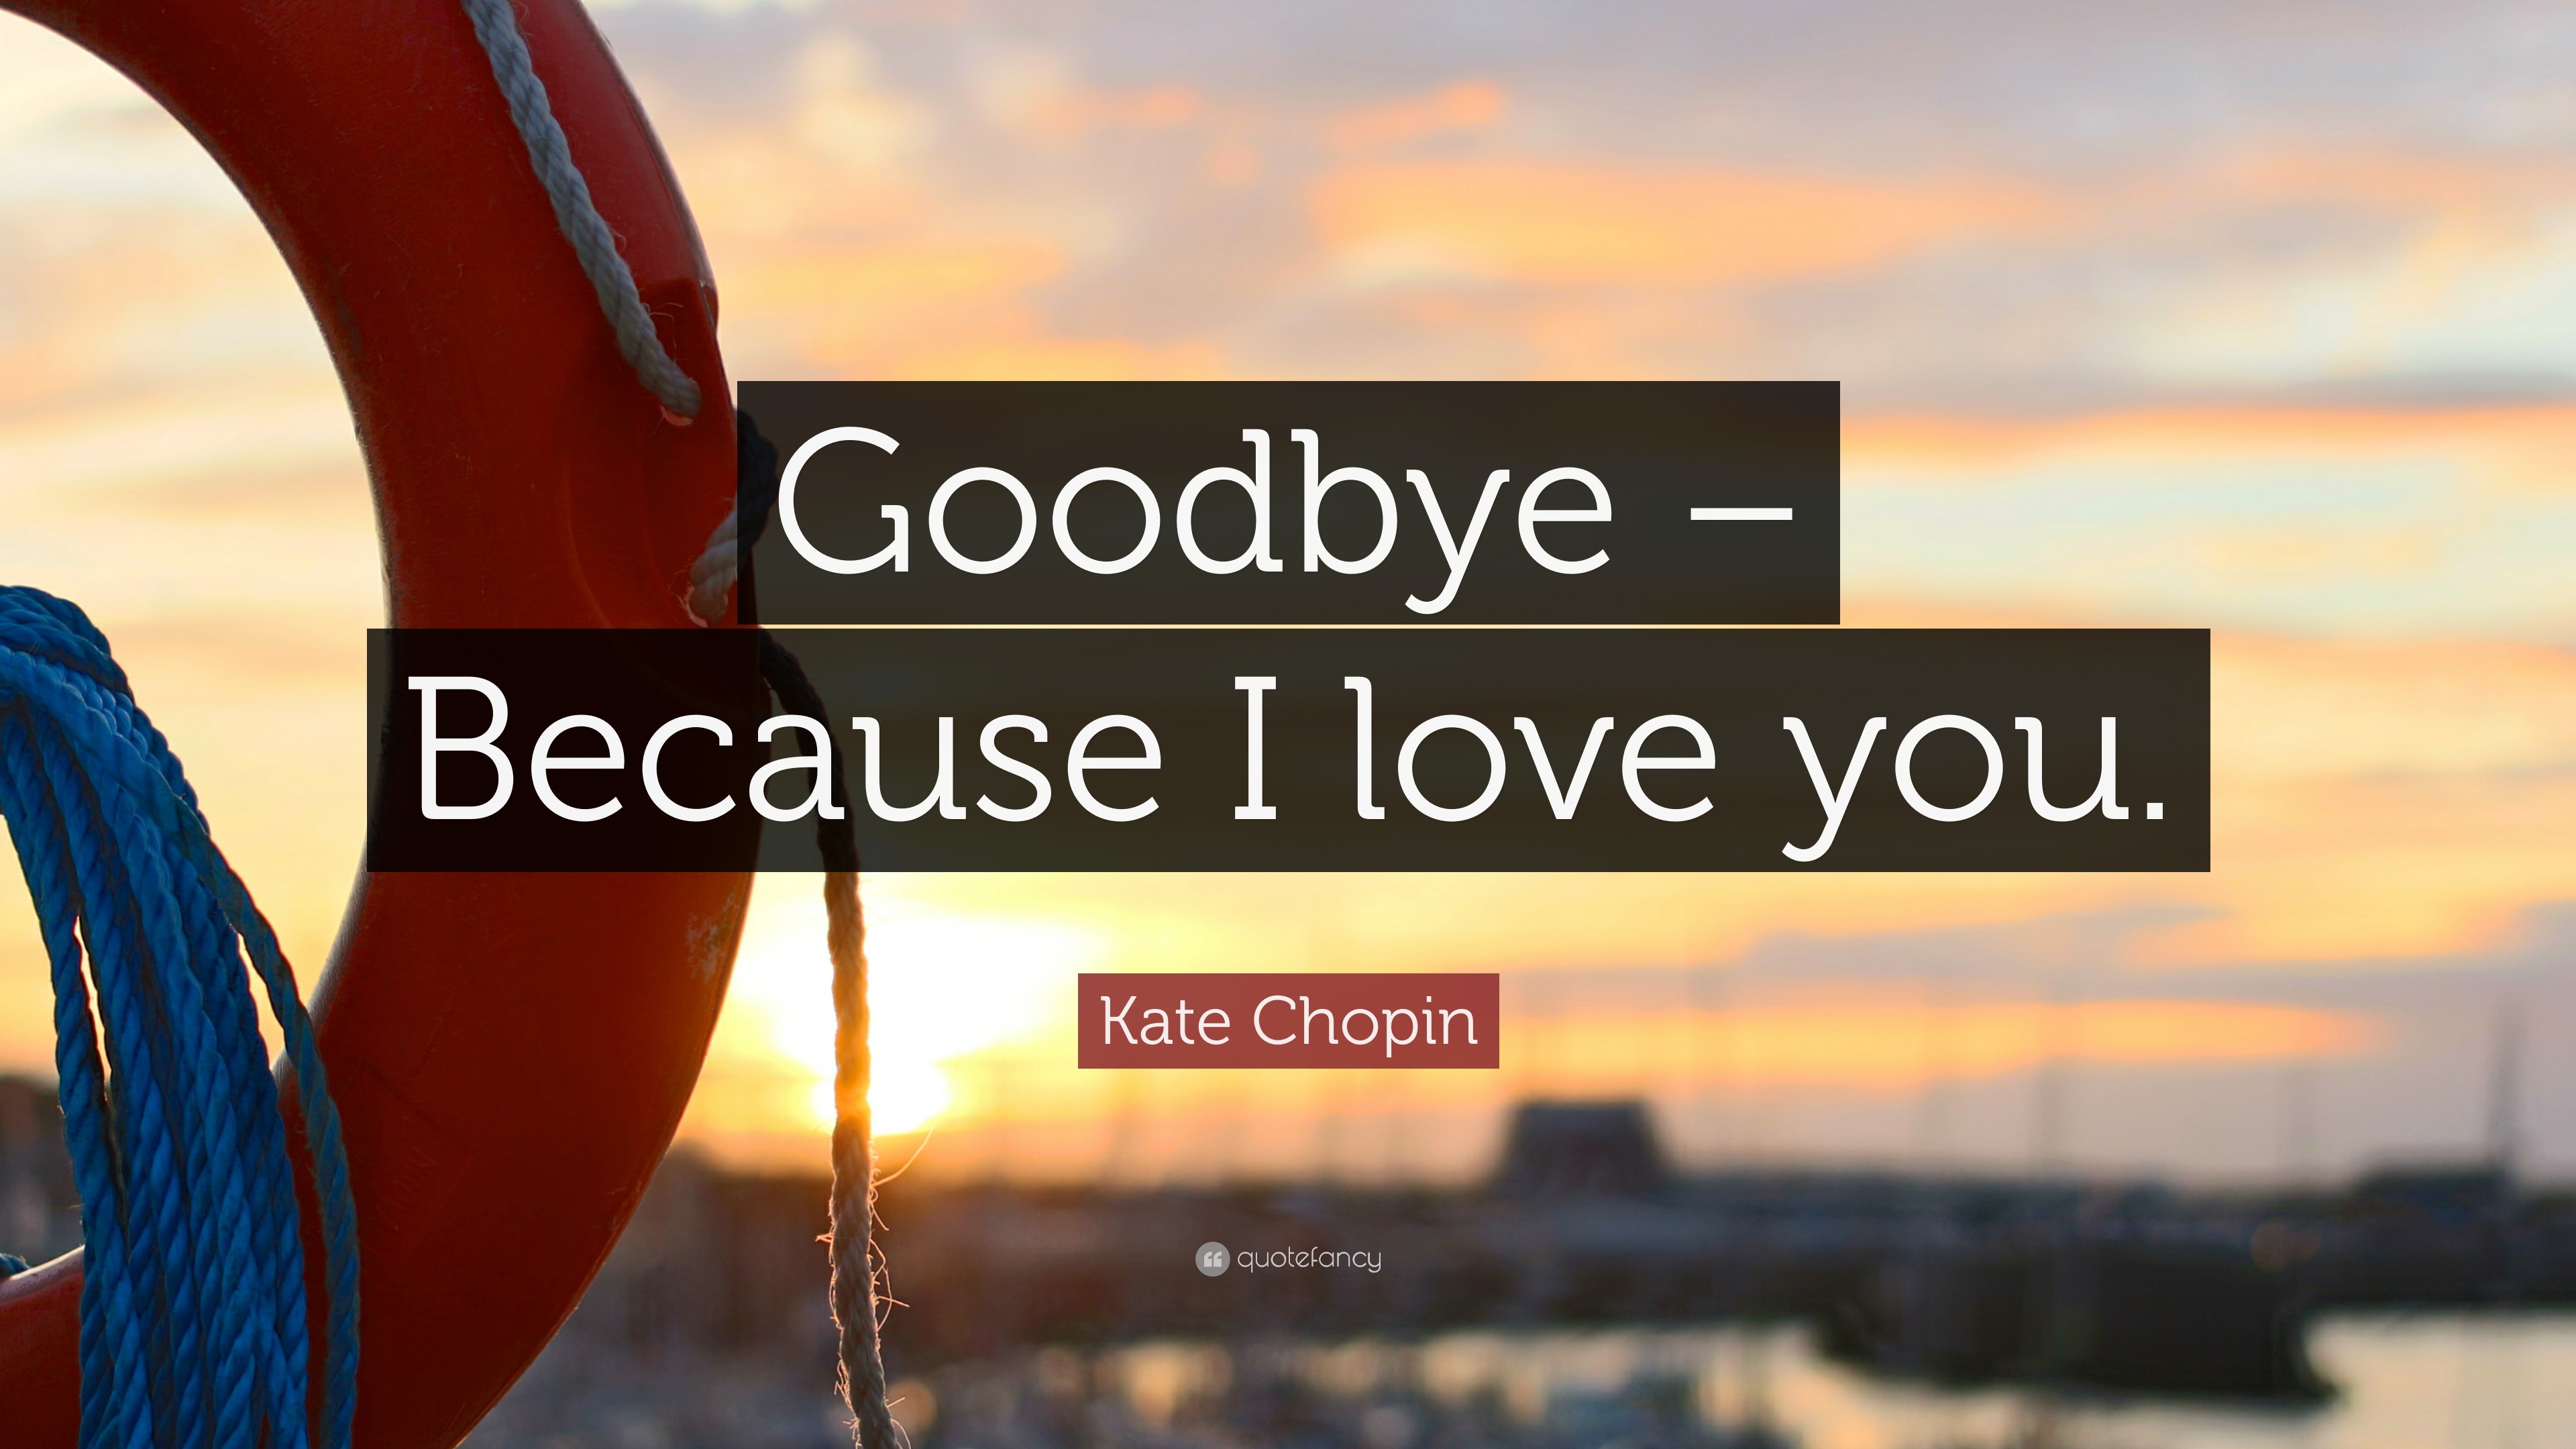 Kate Chopin Quote: "Goodbye - Because I love you." (11 wallpapers) - Quotefancy